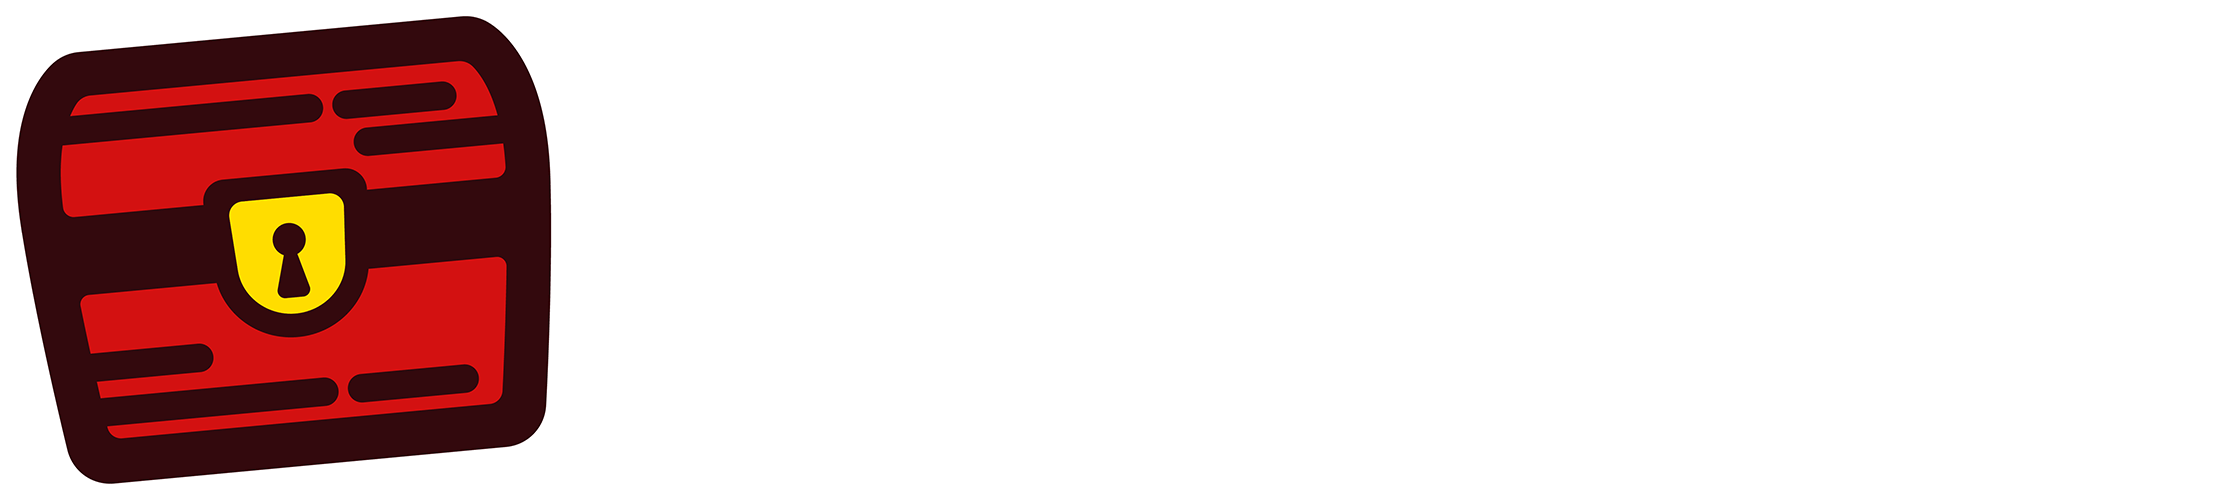 Image Chest Logo | Free Image Hosting And Sharing Made Easy | Click to navigate to the home page.